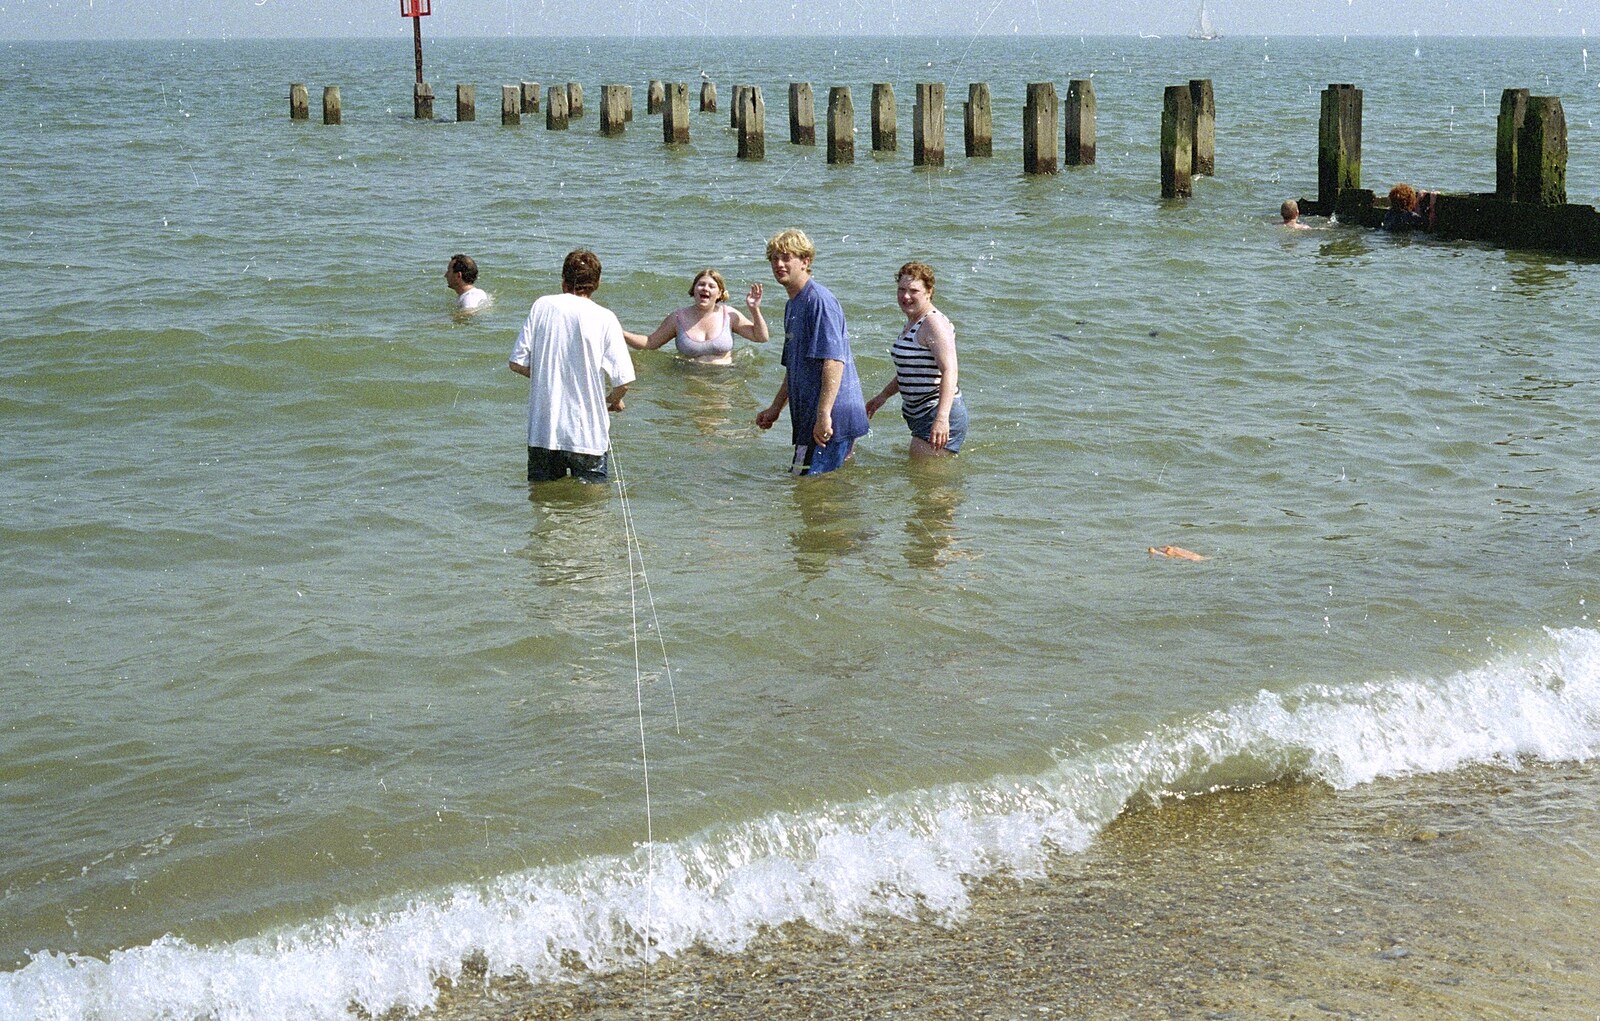 Apple, Helen Paul and Sally are in the sea from The First BSCC Bike Ride to Southwold, Suffolk - 10th June 1996